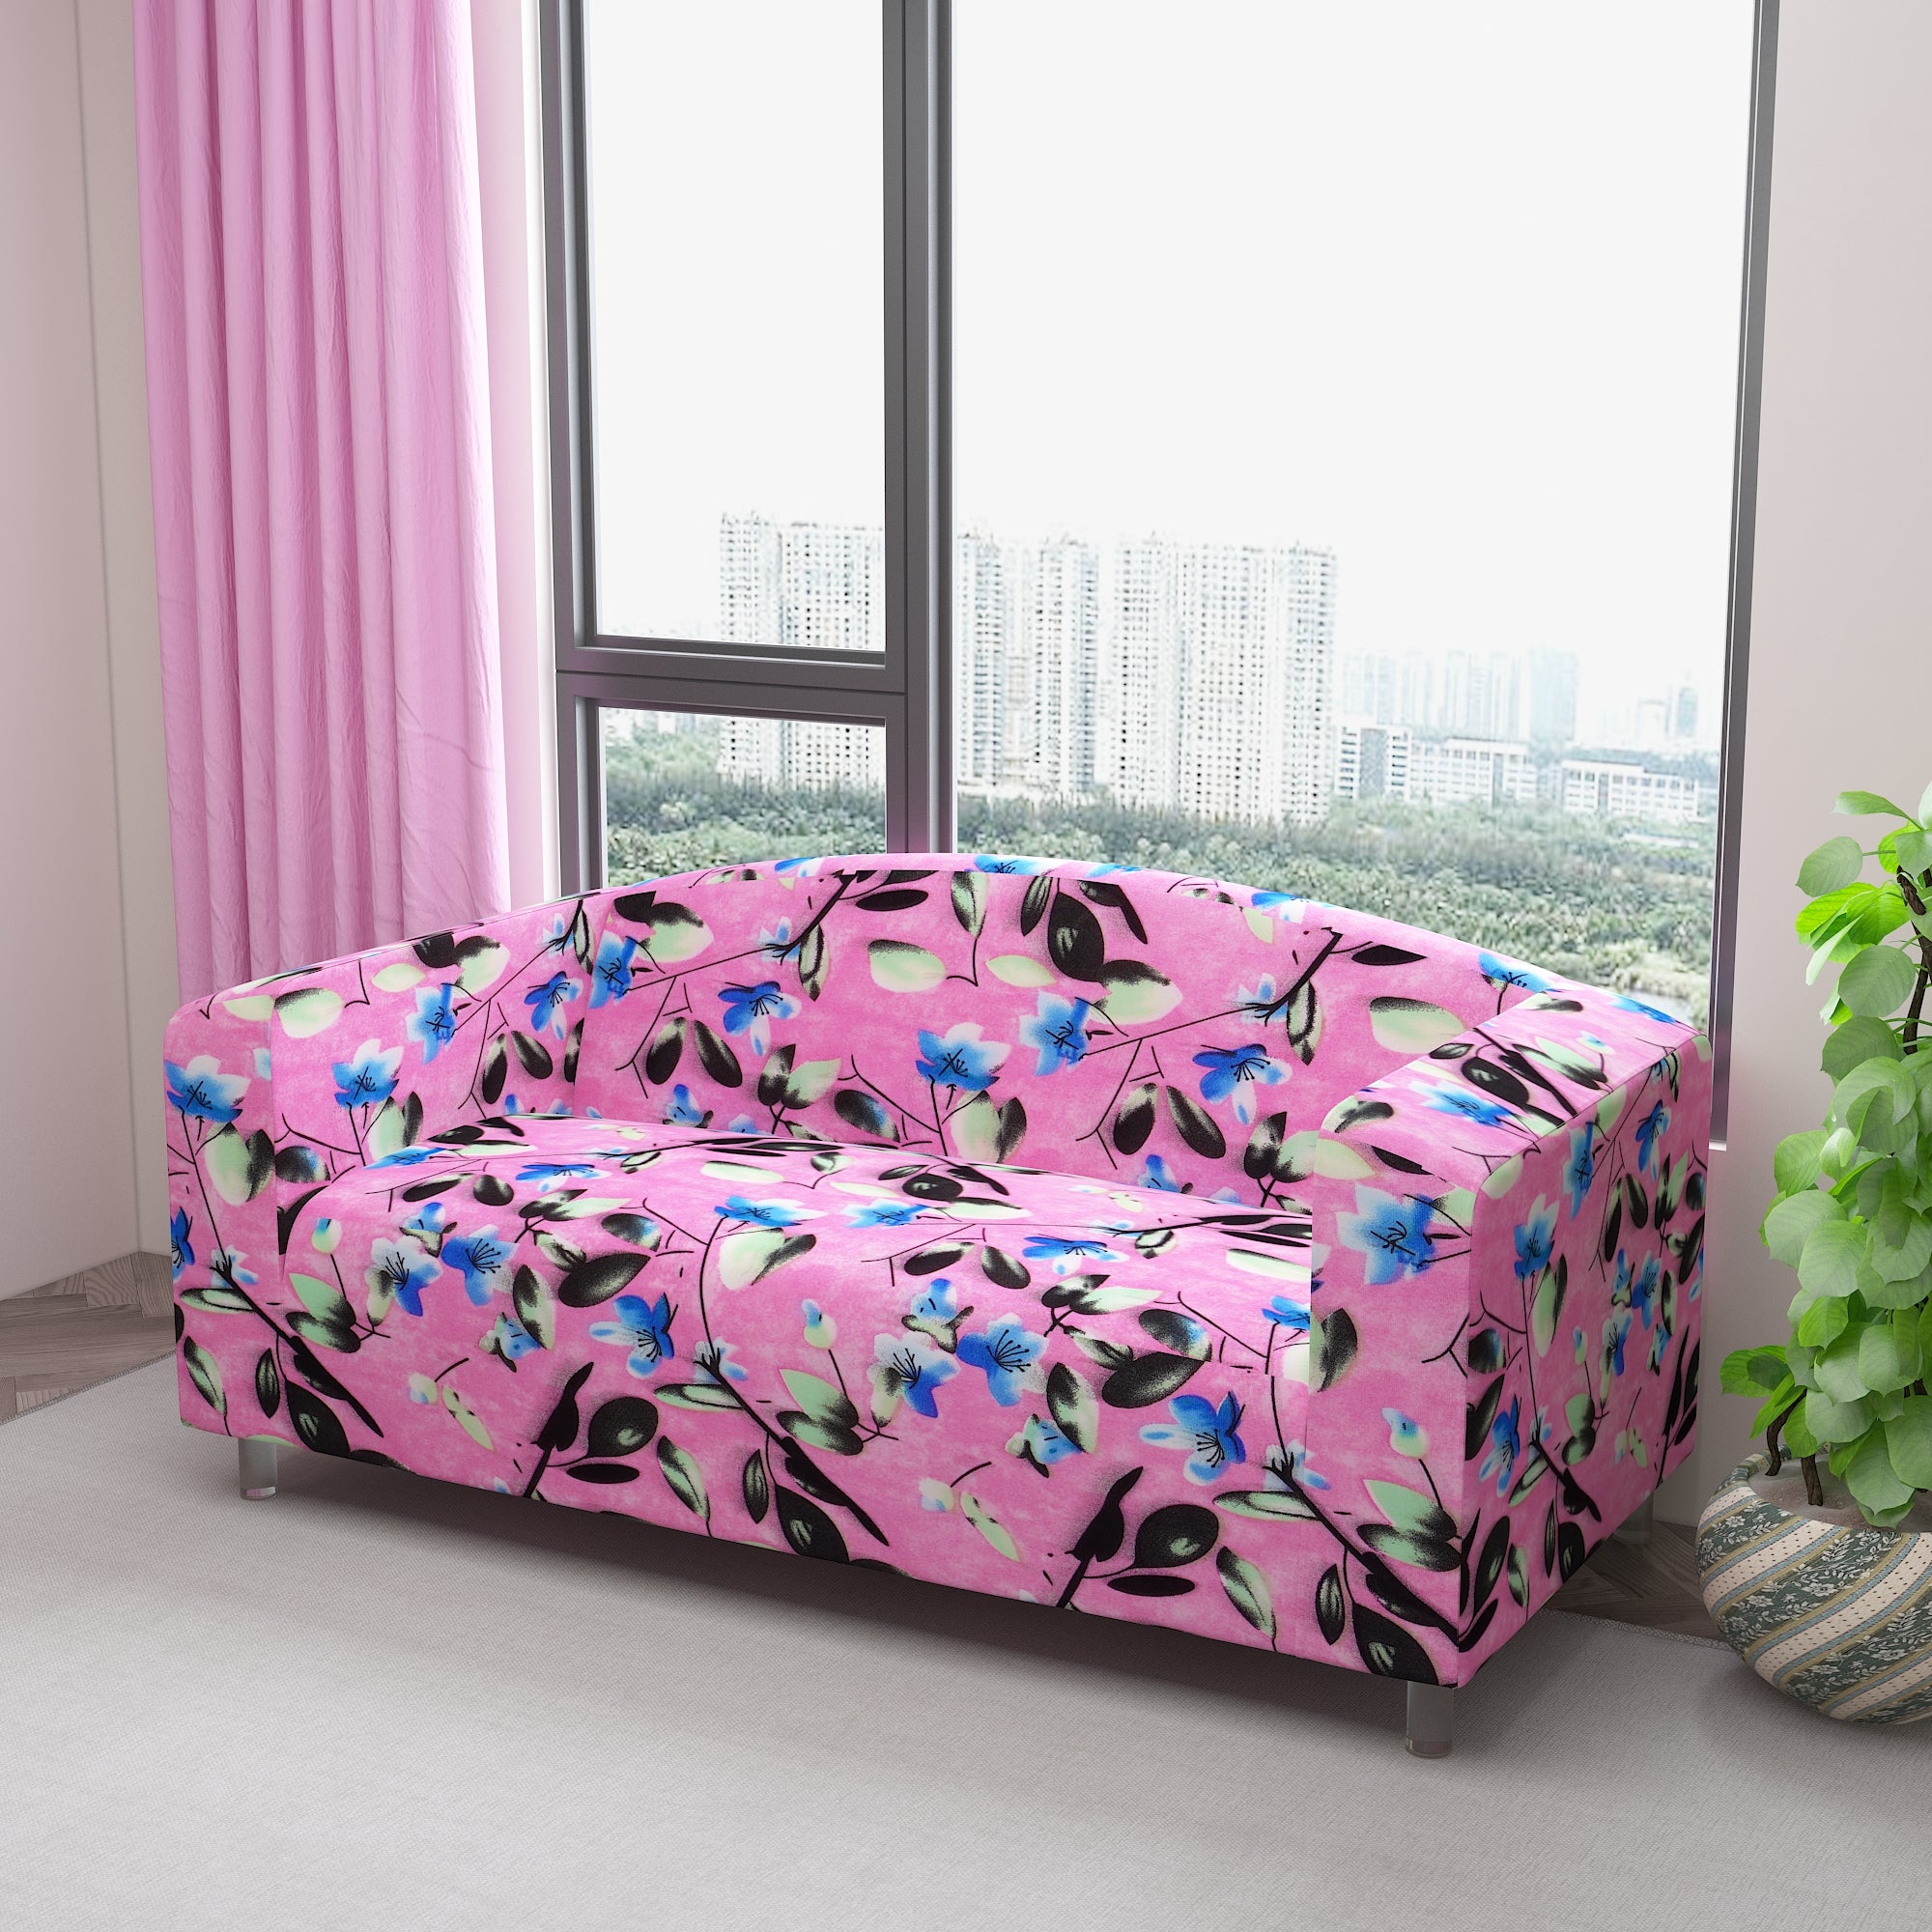 Waterproof Printed Sofa Protector Cover Full Stretchable, SP12 - Dream Care Furnishings Private Limited